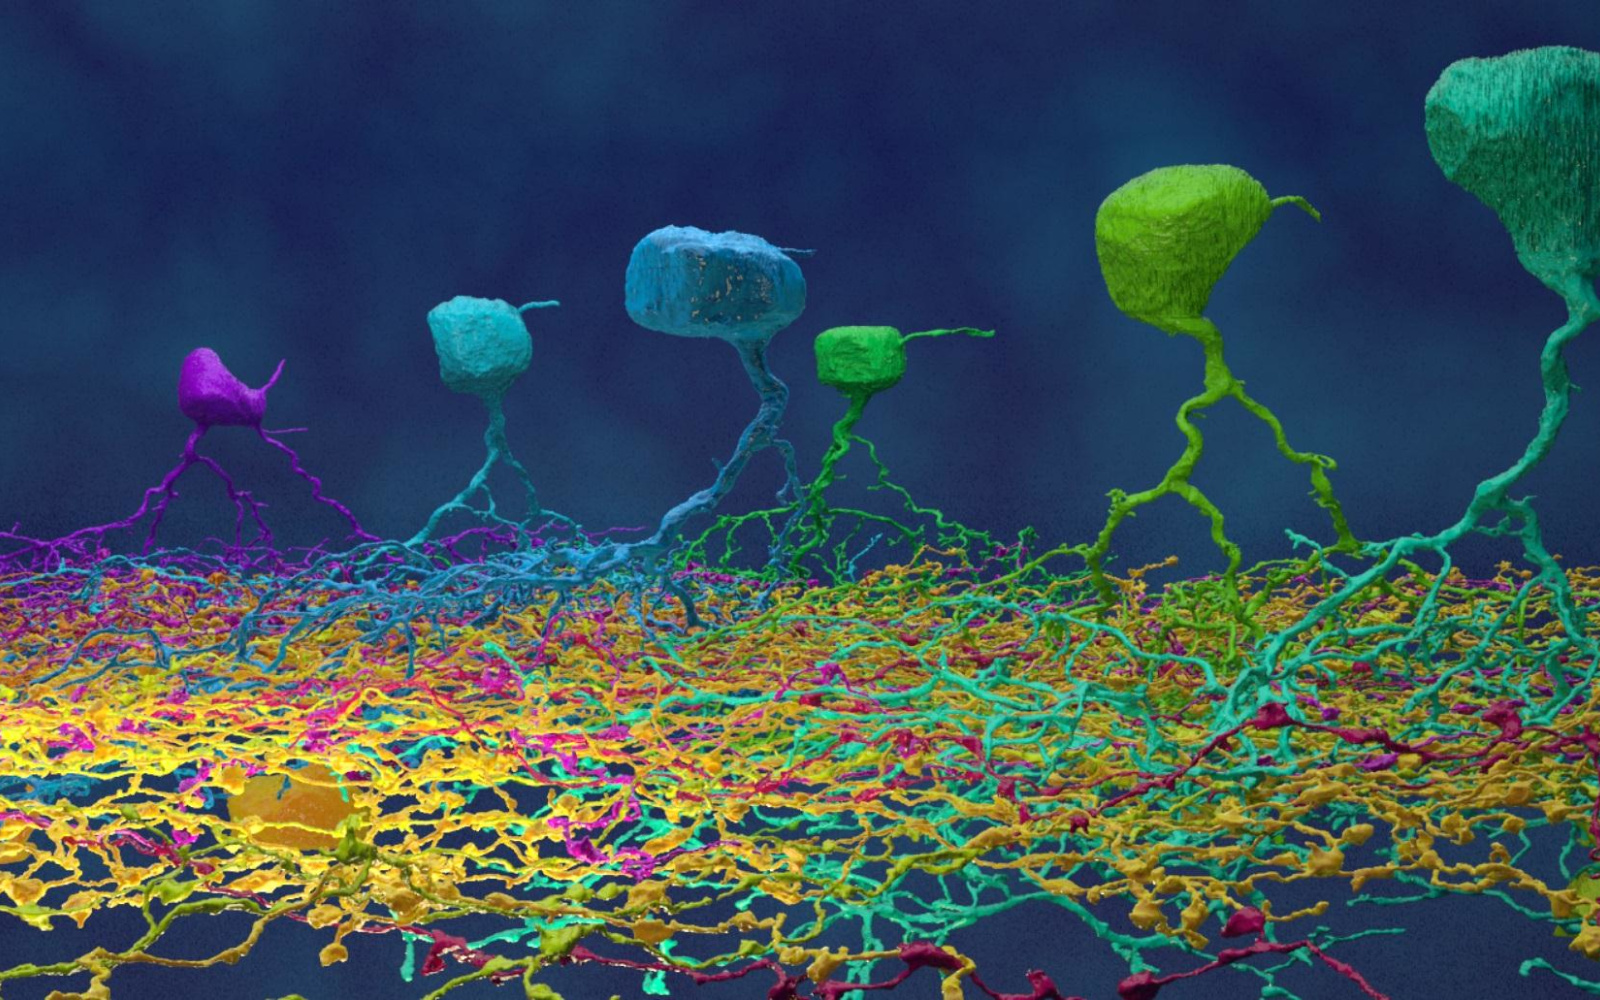 Screenshot taken from a Computergame: colourful netlike tissue